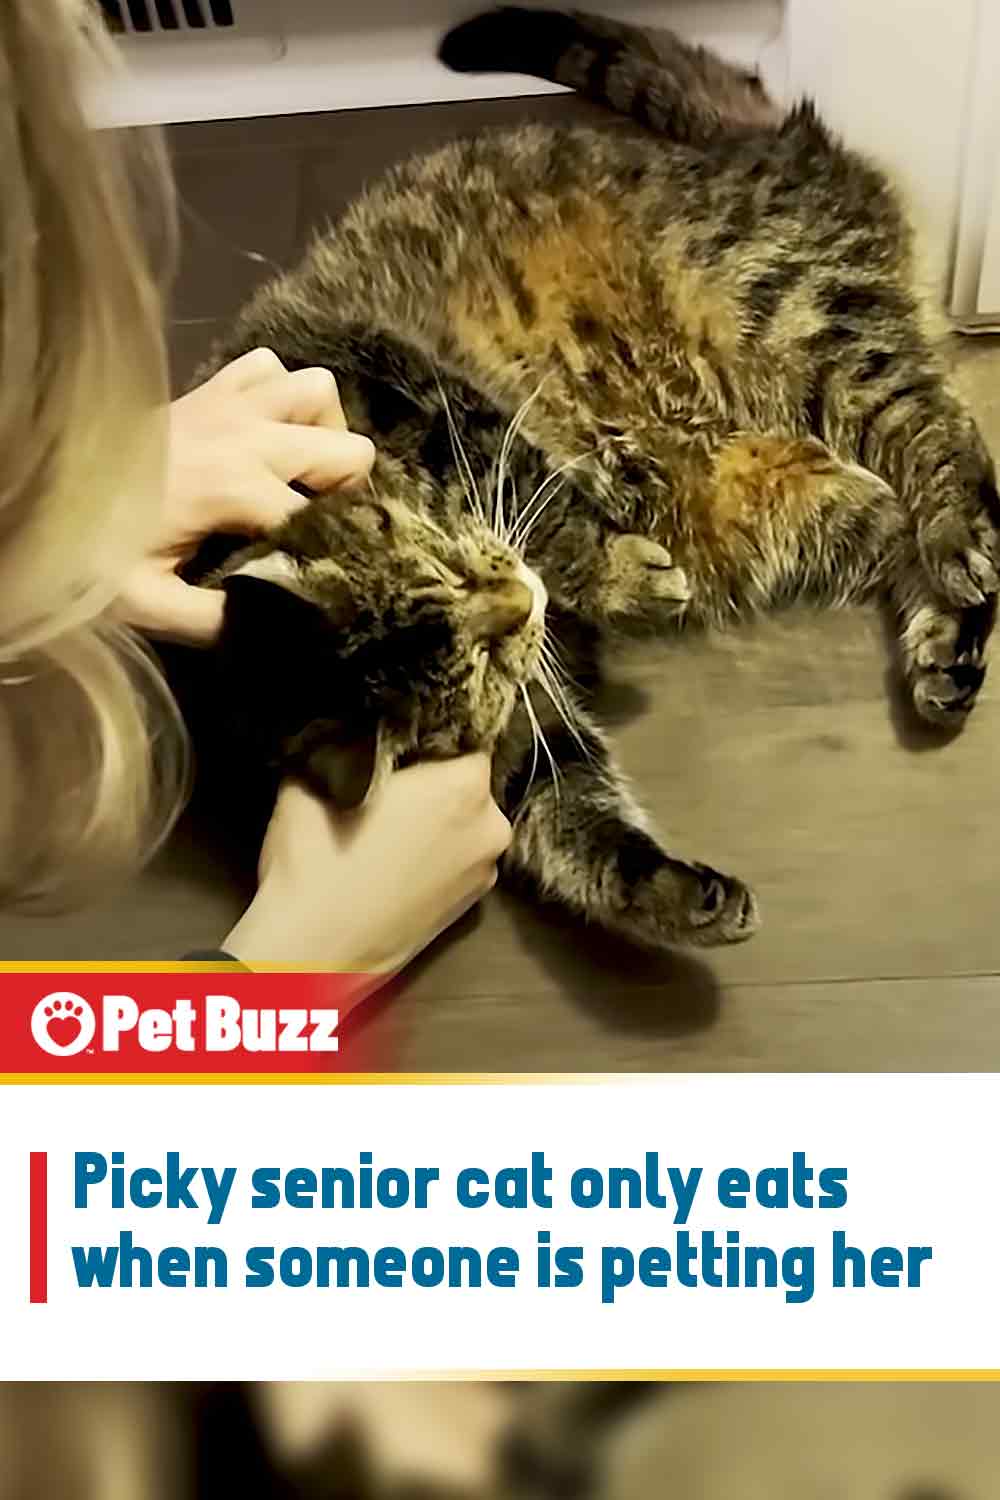 Picky senior cat only eats when someone is petting her